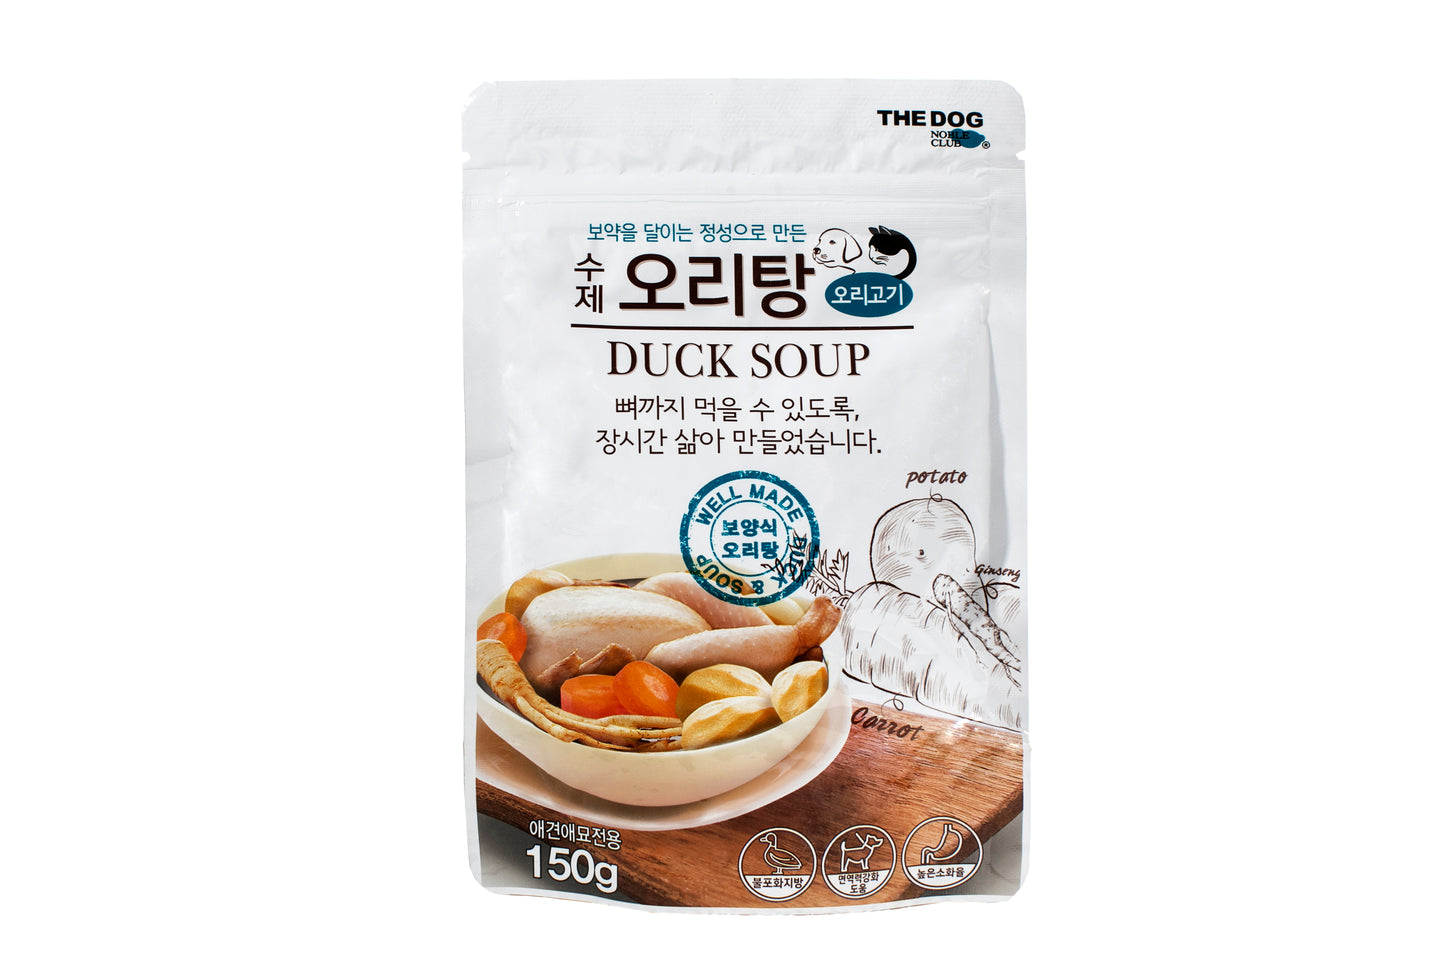 The Dog - Healthy Homemade  Duck Soup 150g